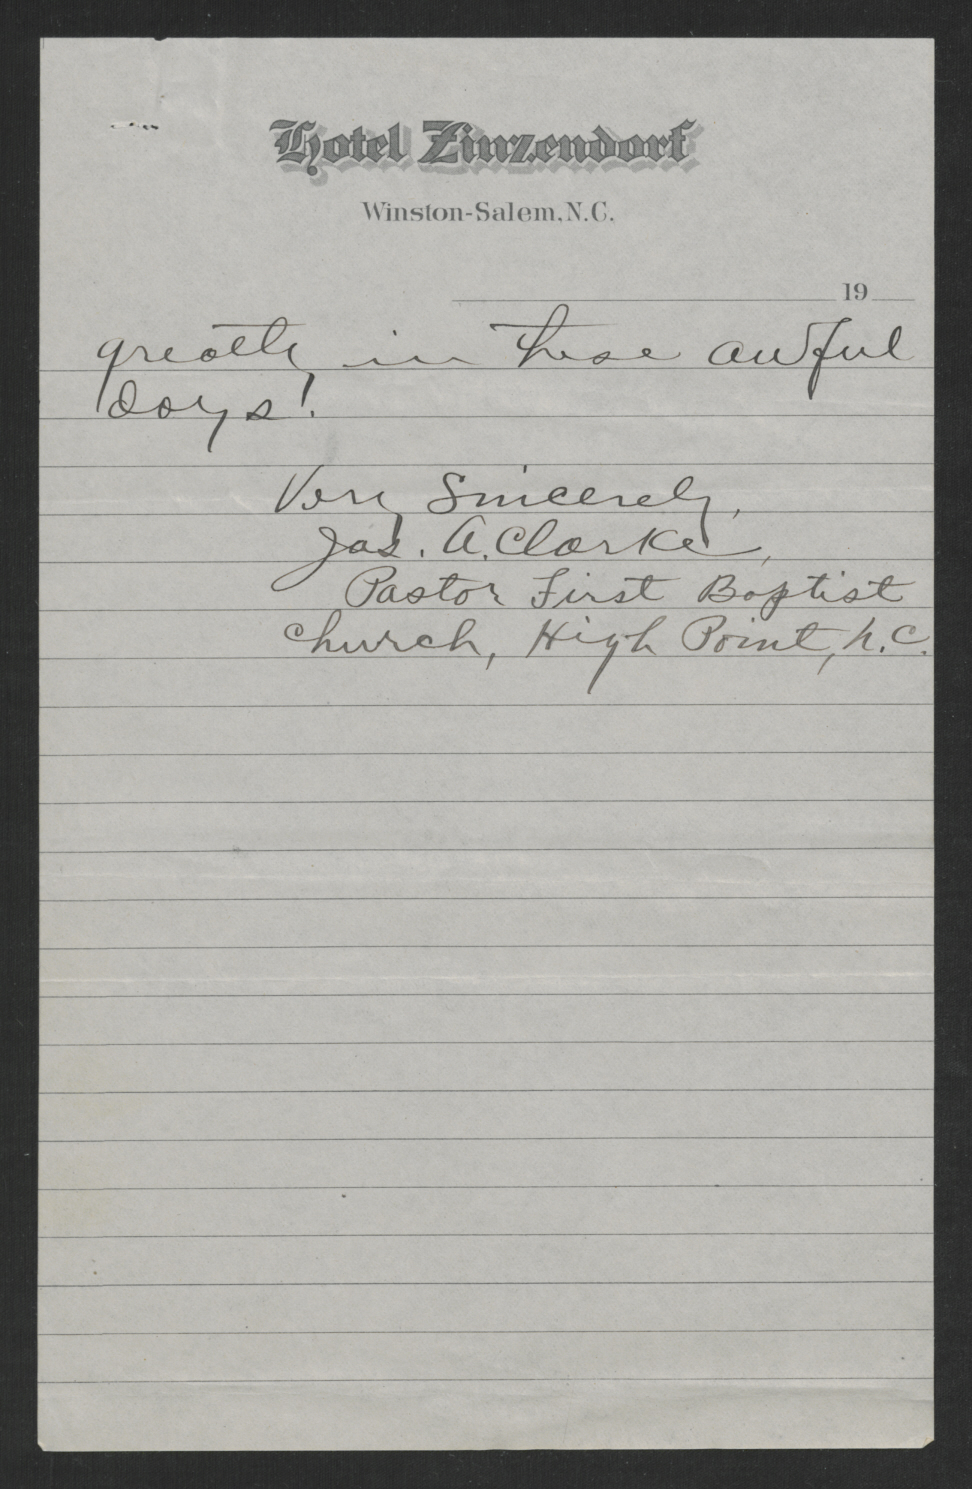 Letter from James A. Clarke to Thomas W. Bickett, September 15, 1919, page 2